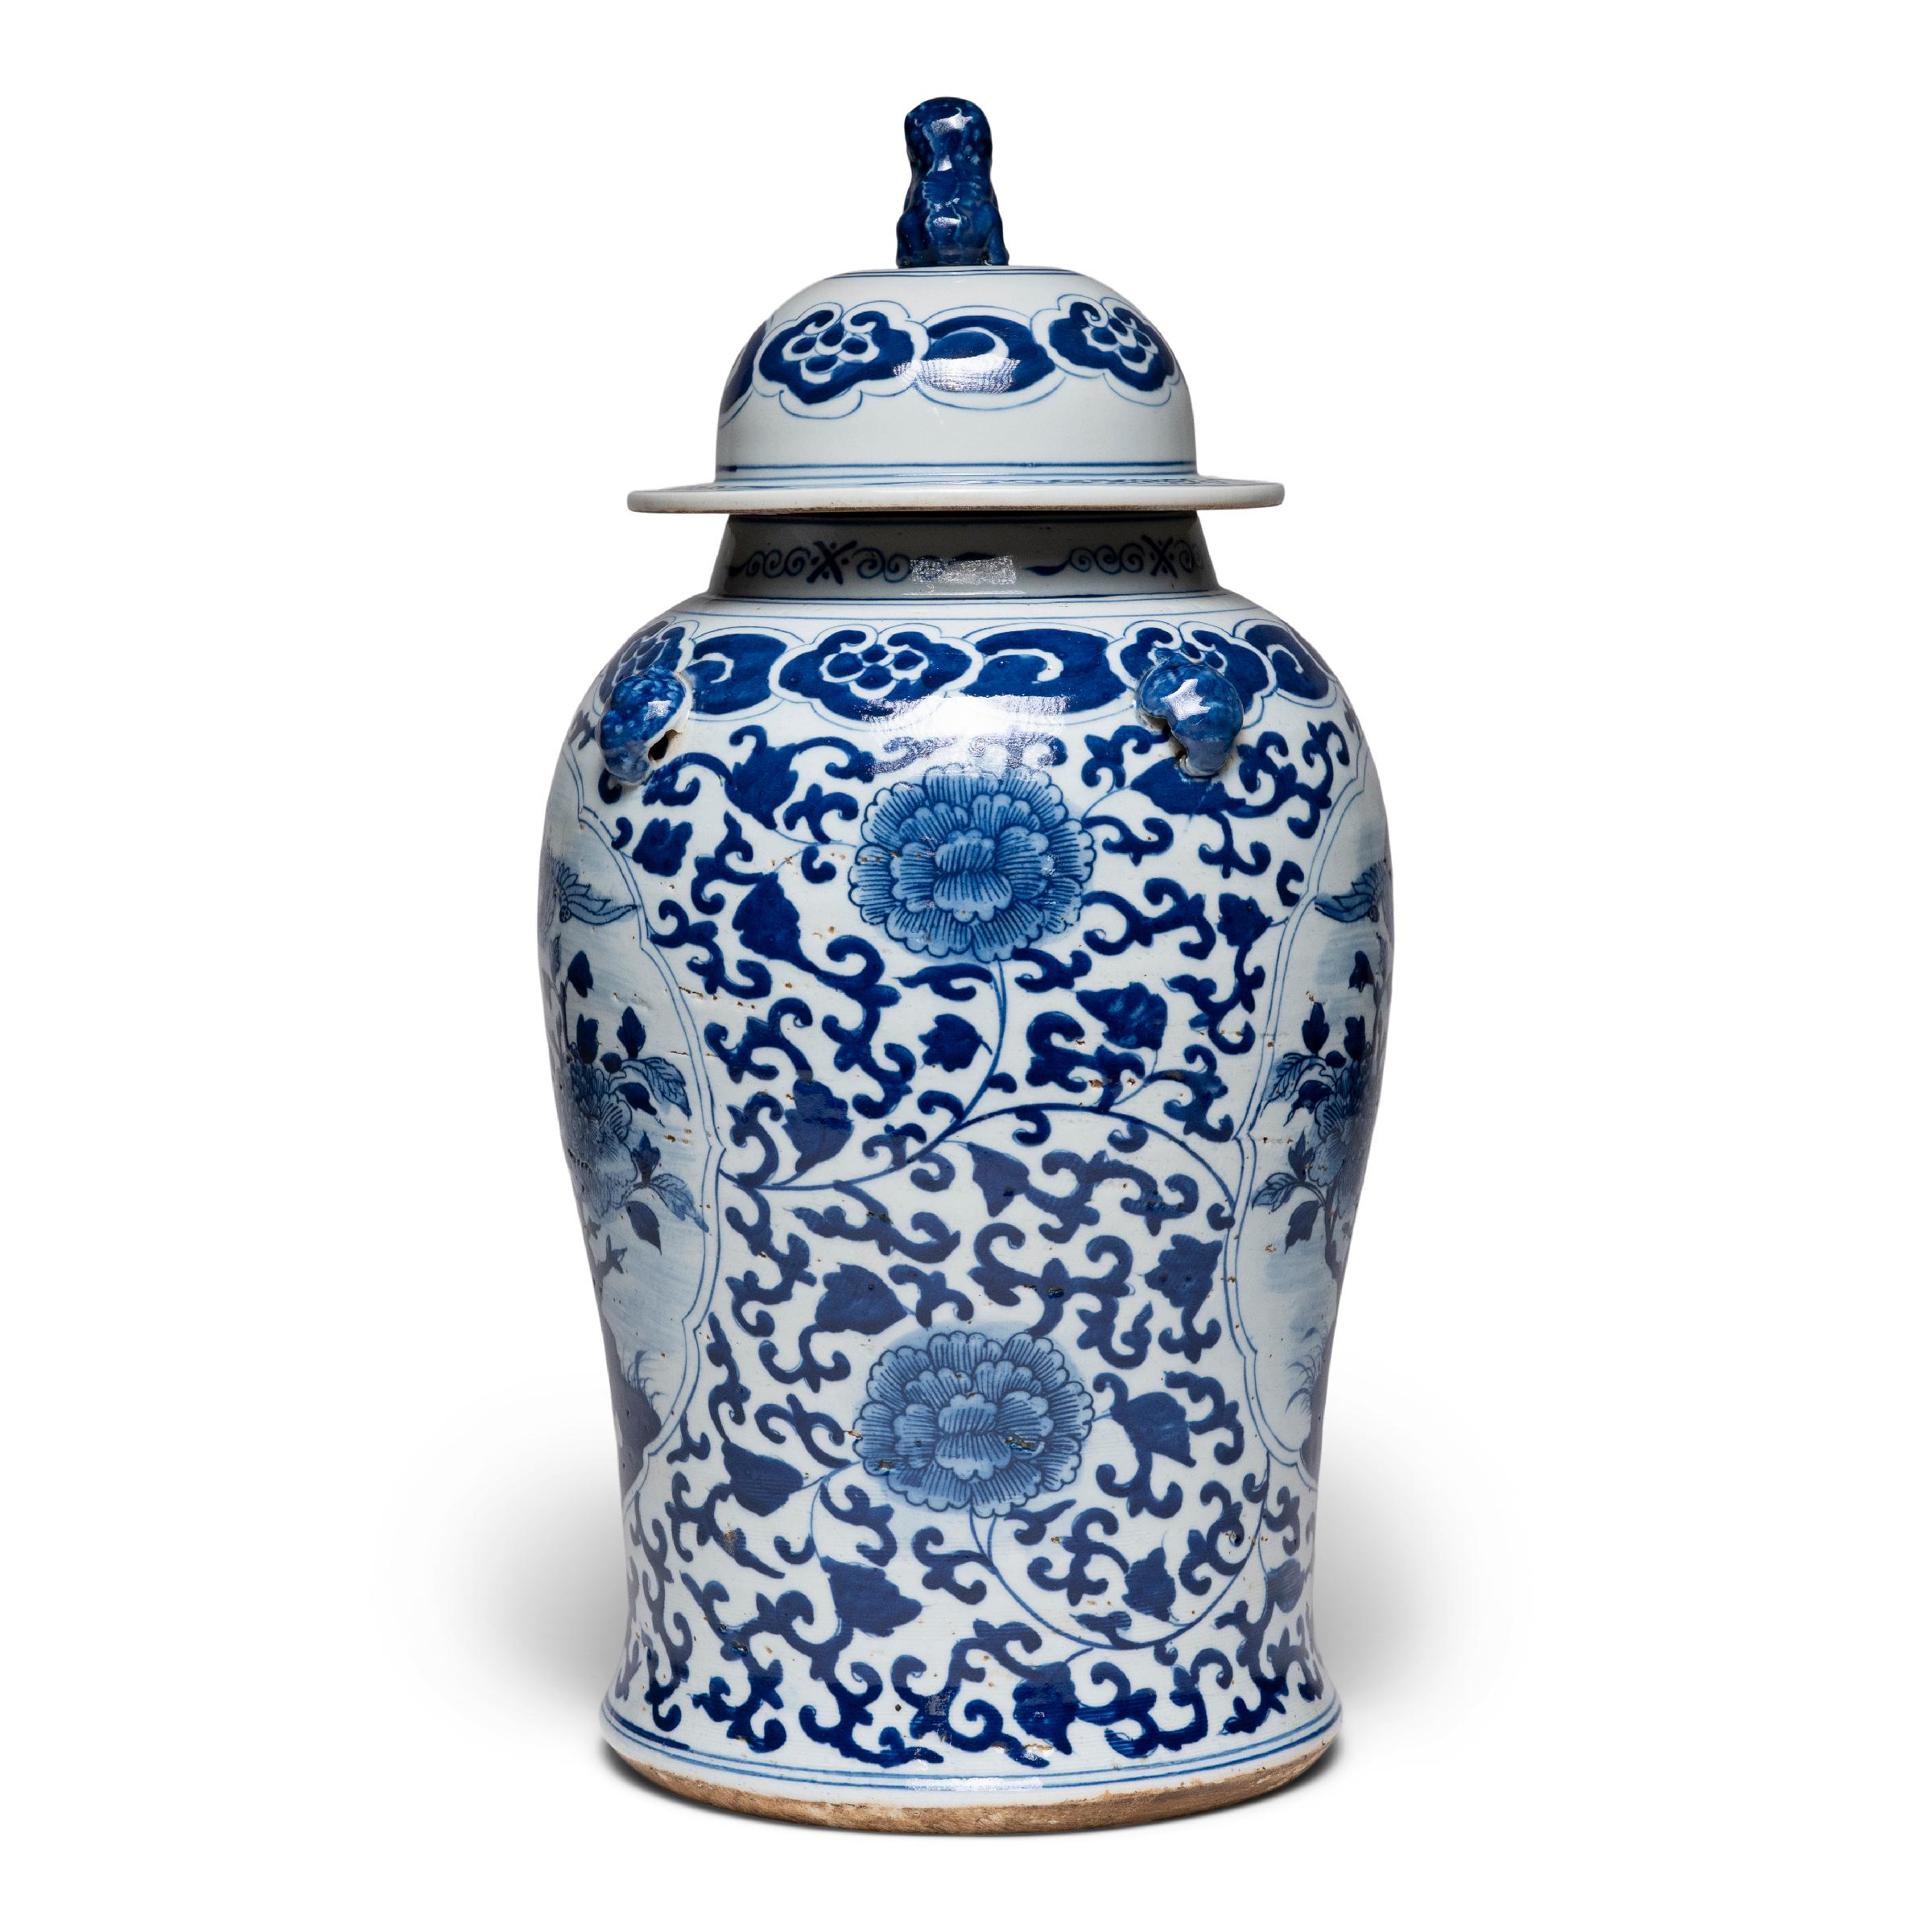 This contemporary lidded baluster jar continues the centuries-old tradition of Chinese blue-and-white porcelain ware. Painted with cobalt pigments for a brilliant blue finish, the jar is densely patterned with trailing vine scrollwork and peony